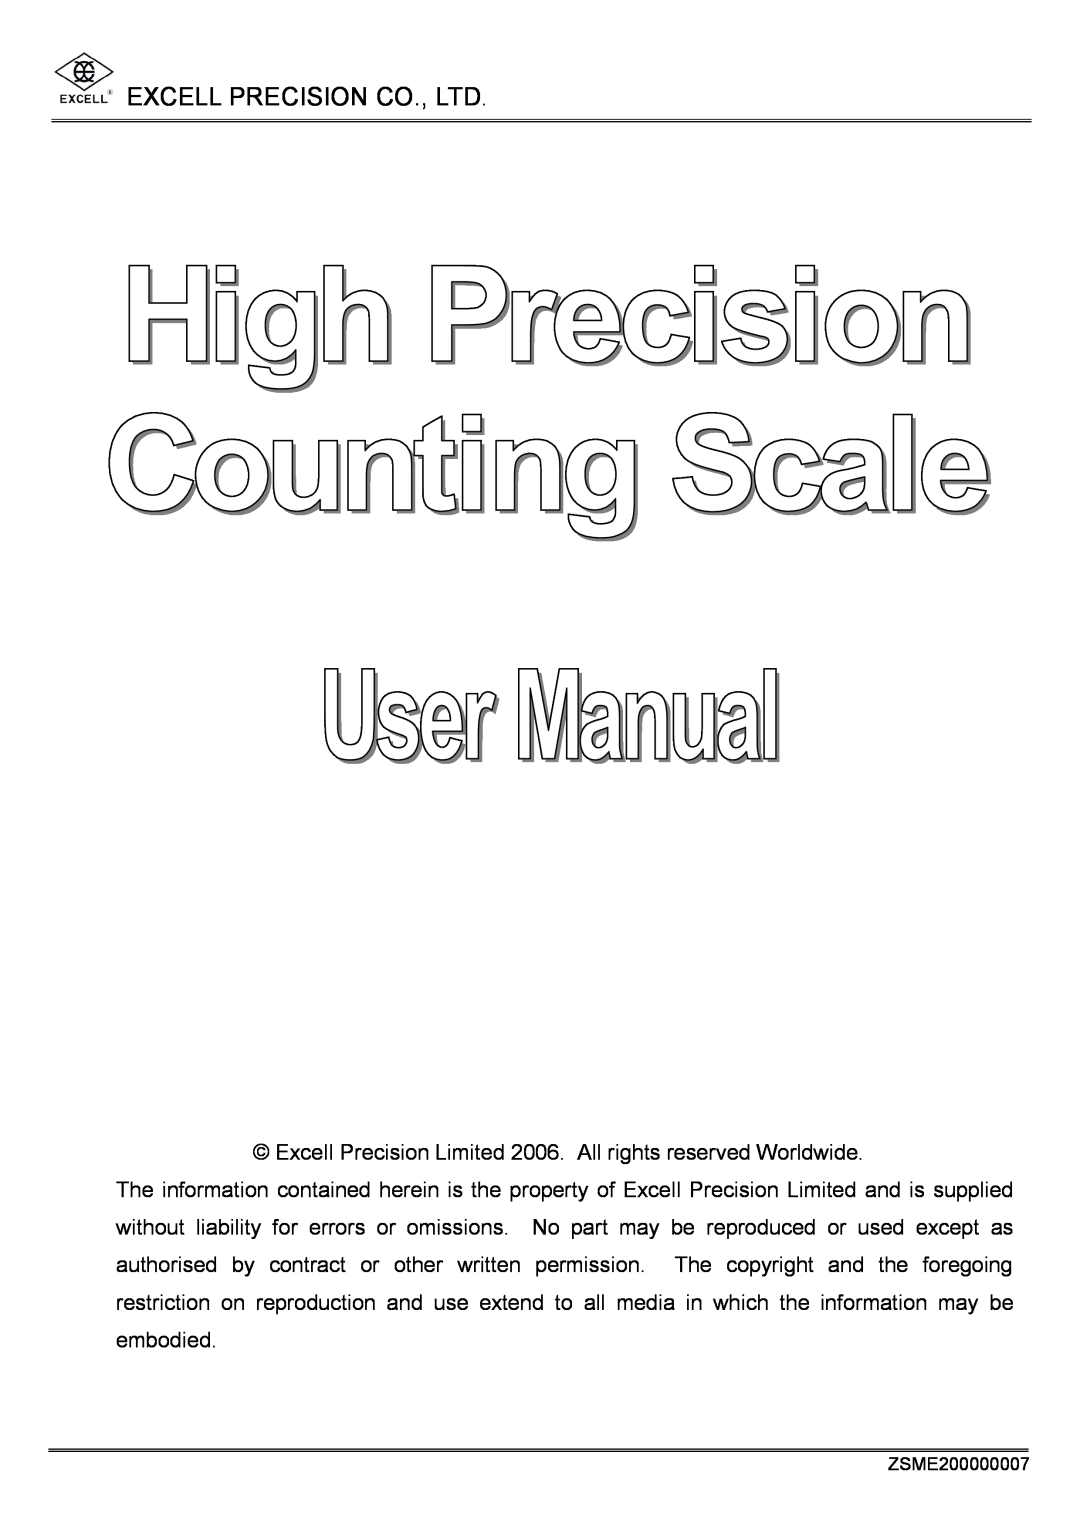 Excell Precision High Precesion Counting Scale manual Excell Precision Limited 2006. All rights reserved Worldwide 